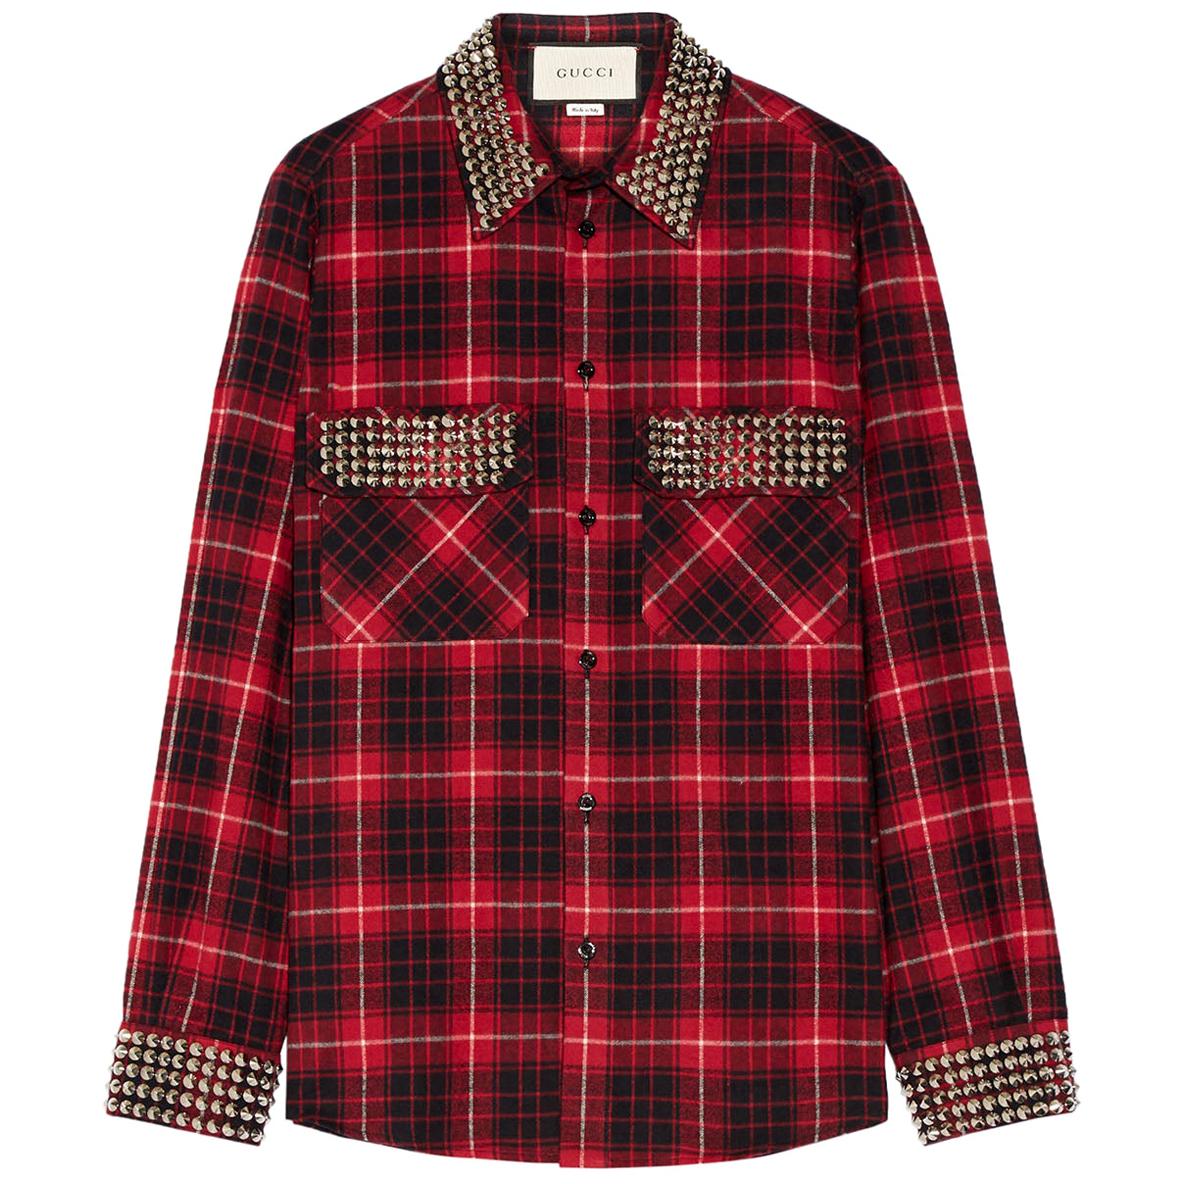 Gucci Embellished Plaid Cotton Flannel 